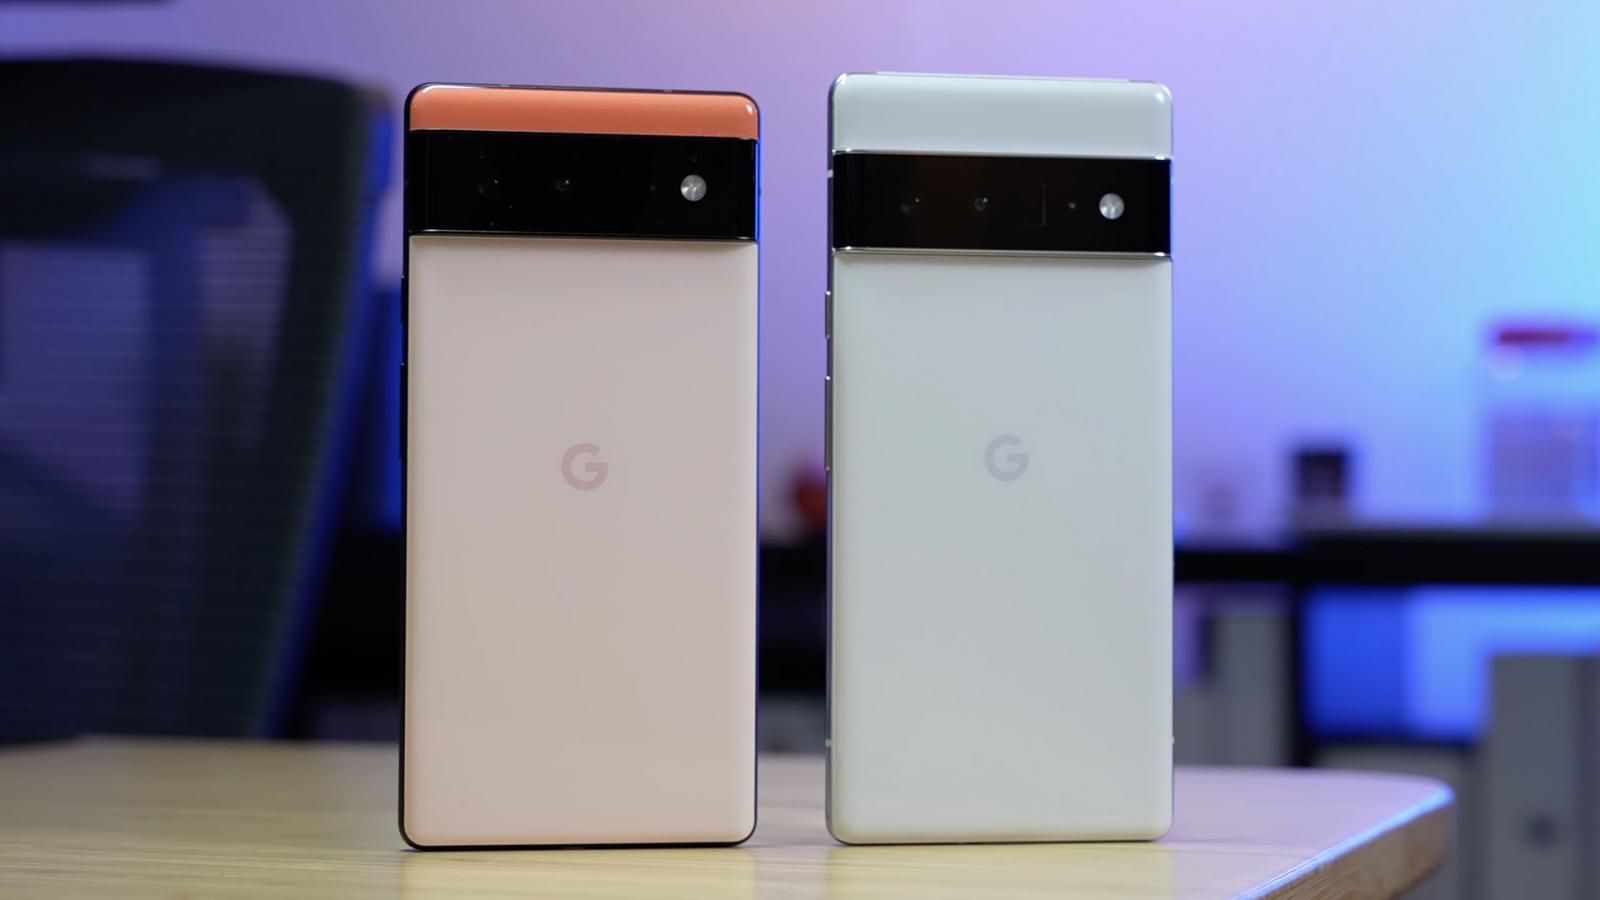 Pixel 6 and Pixel 6 Pro side by side